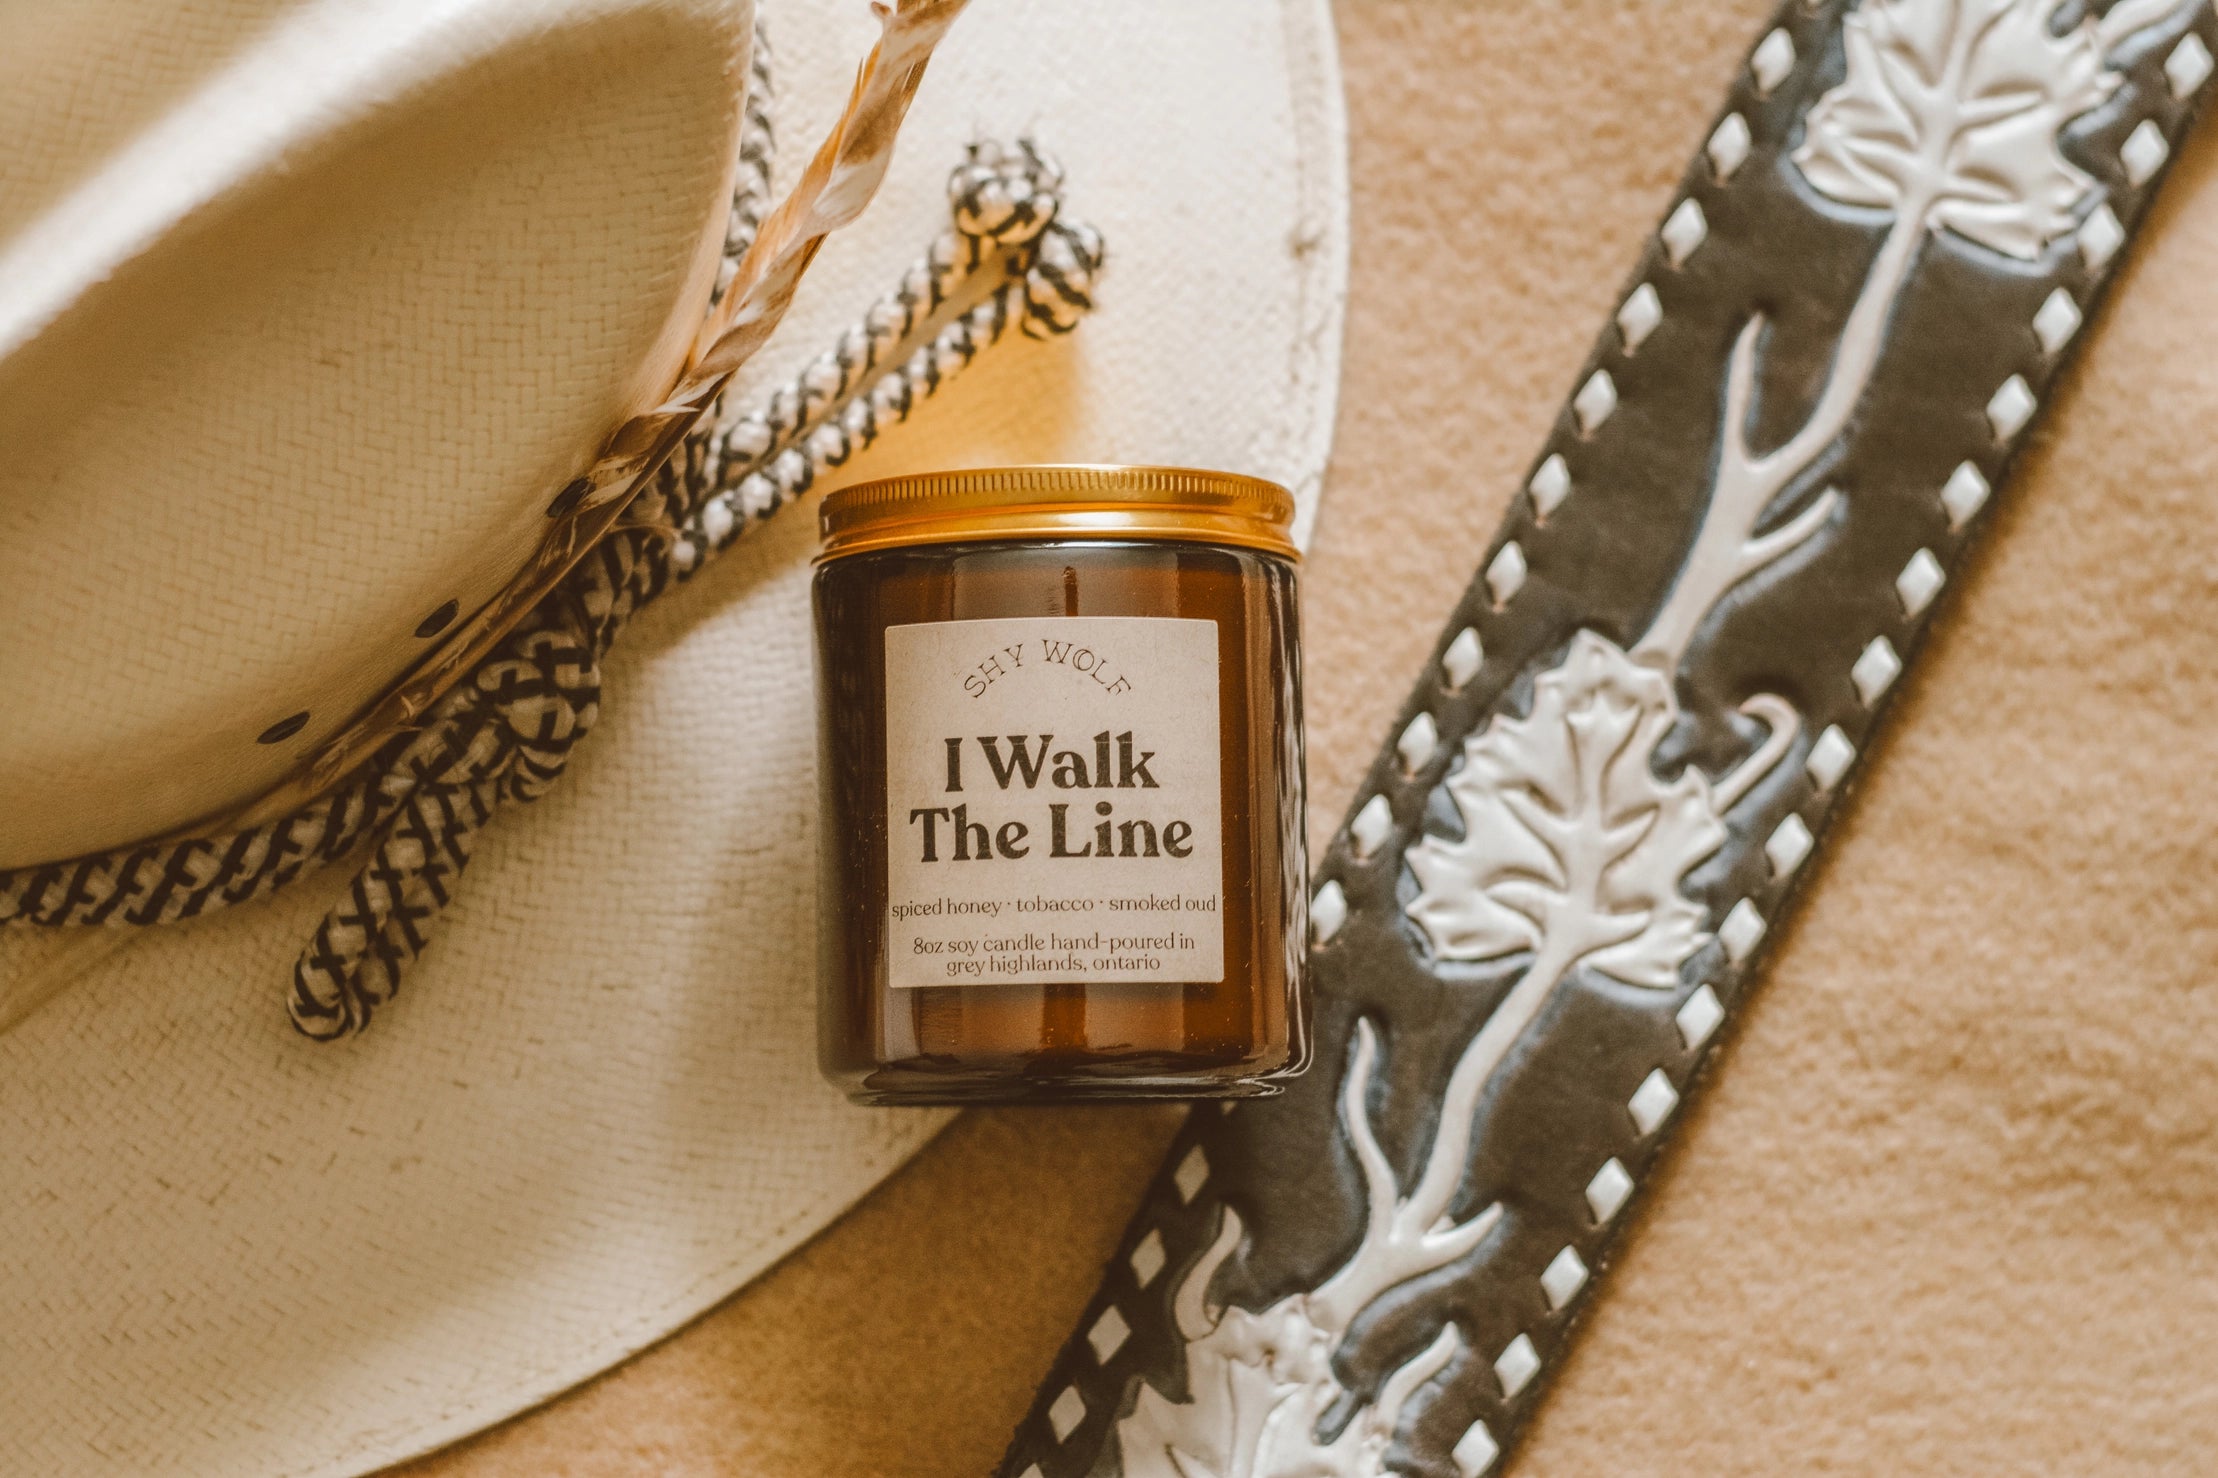 I Walk the Line - scented soy candle